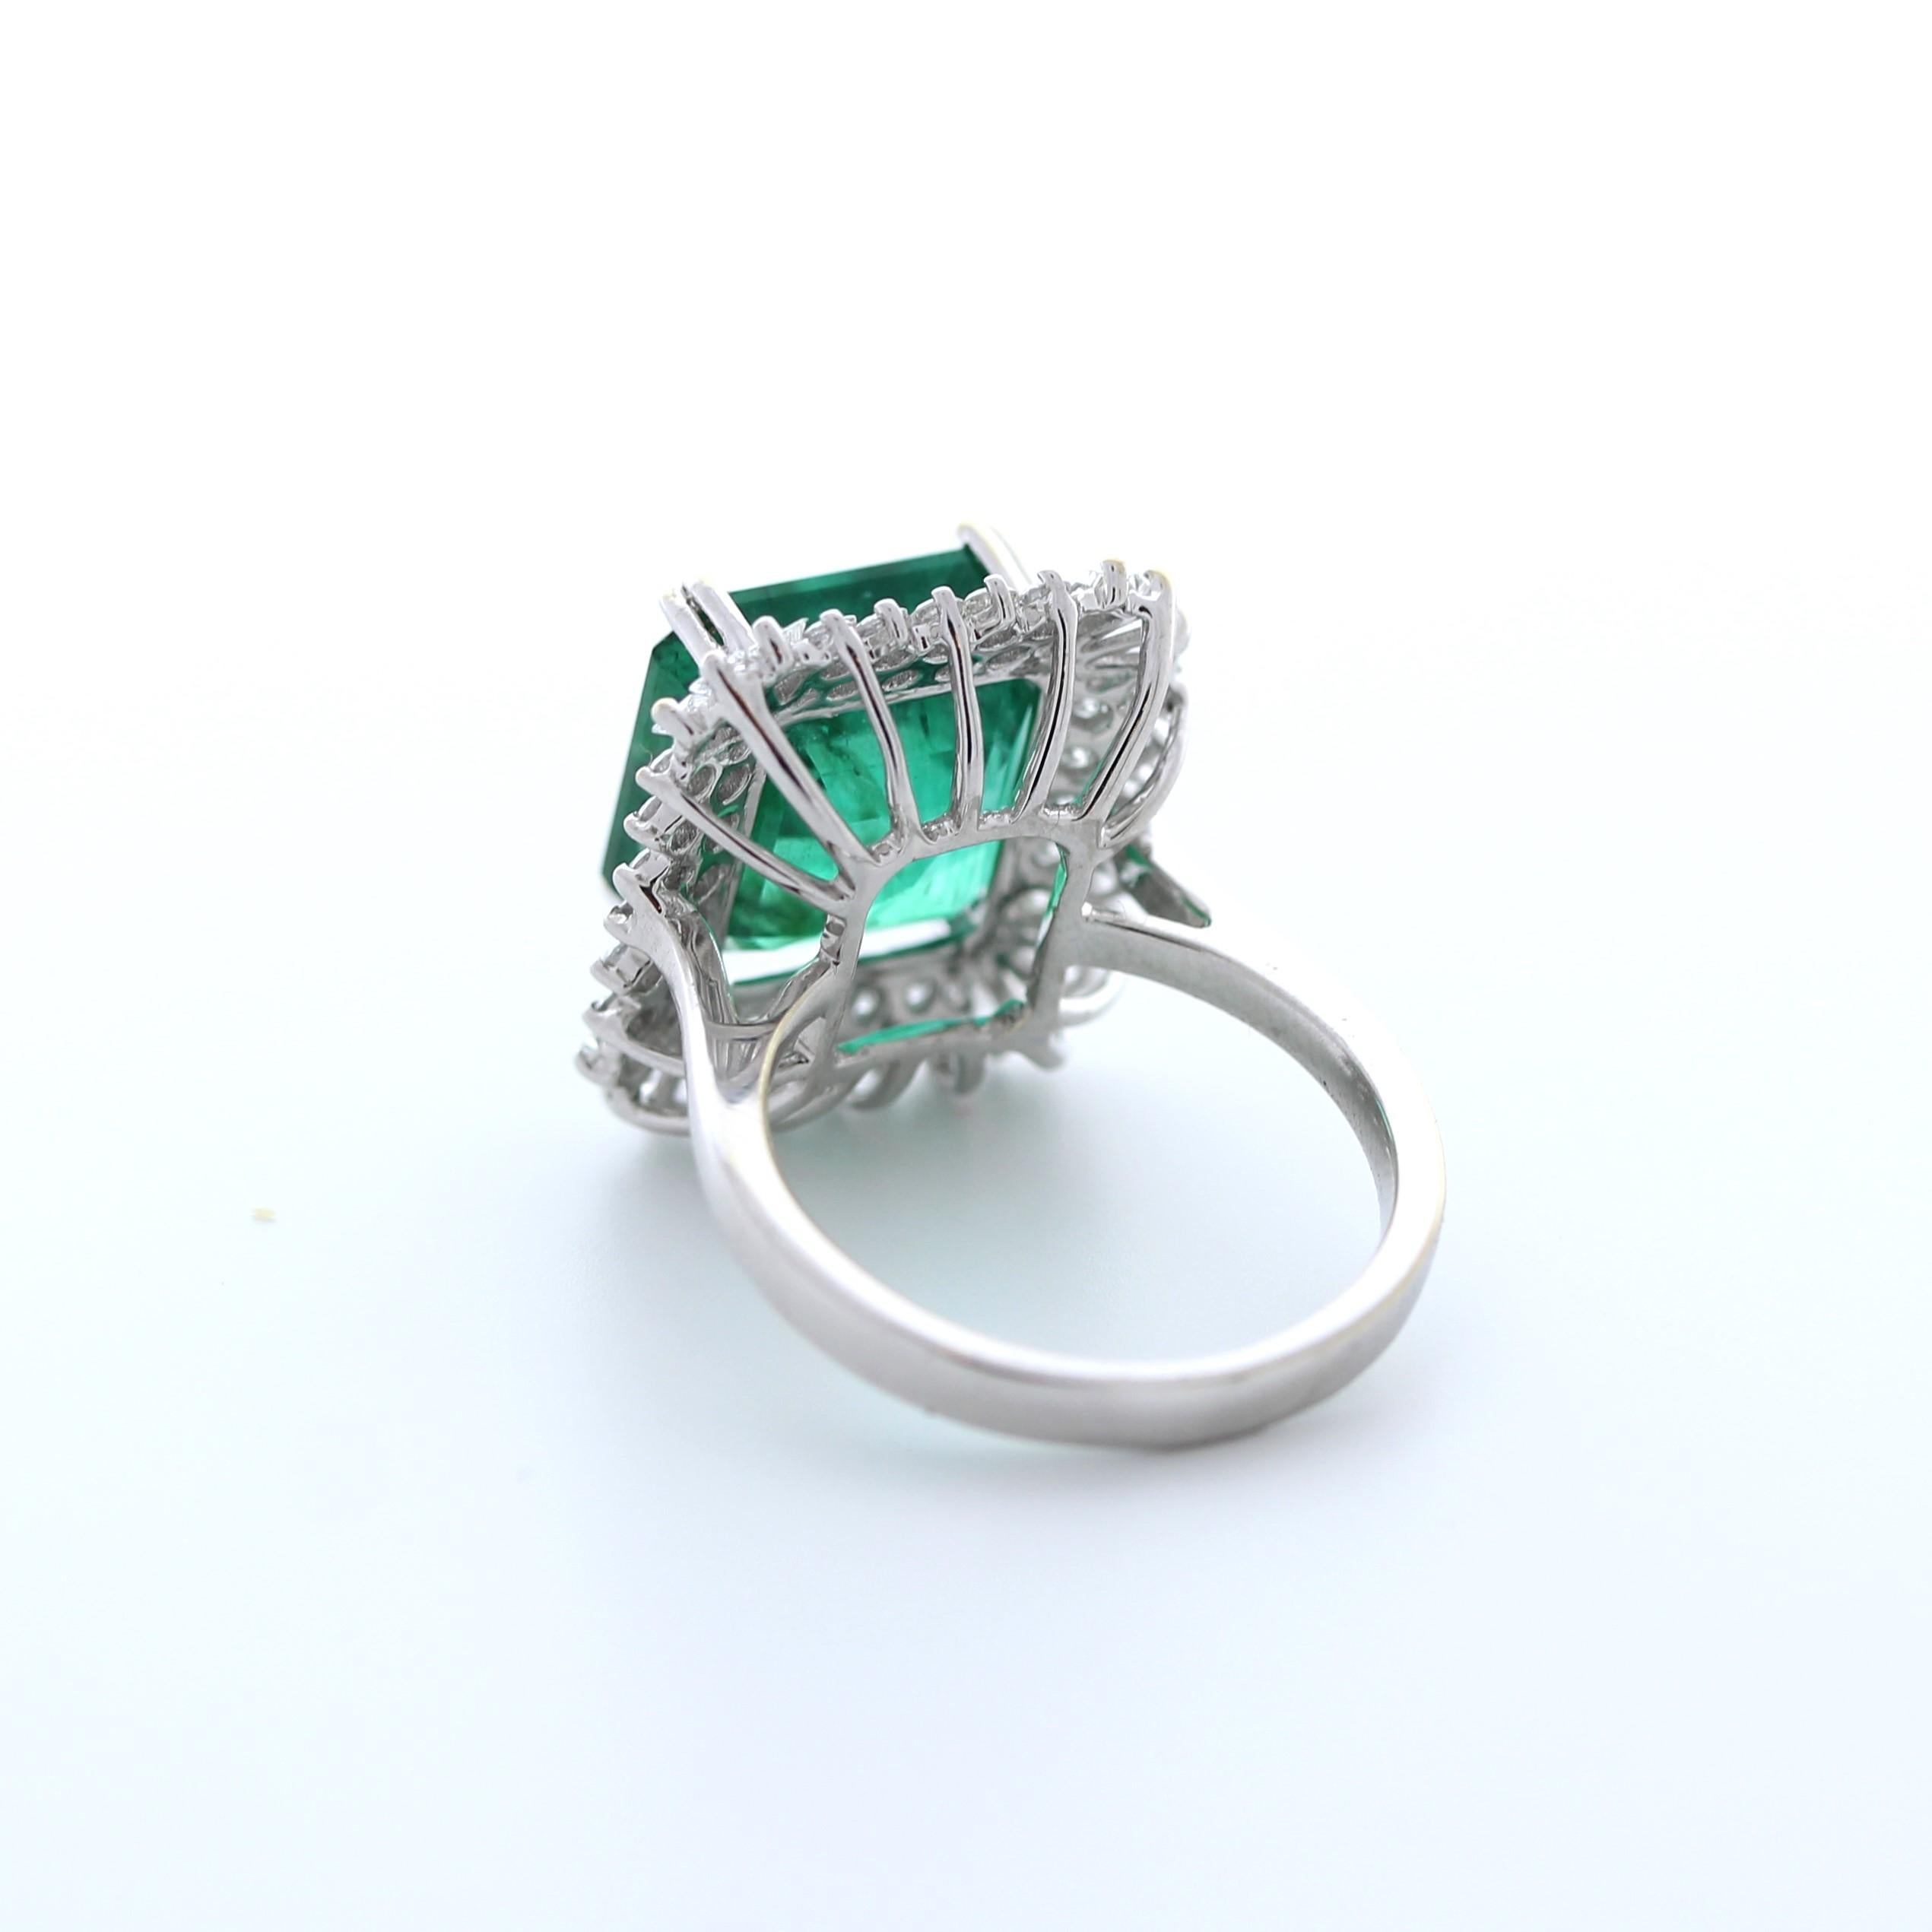 Contemporary 8.97 Carat Weight Green Emerald & Round Diamond Fashion Ring in 18k White Gold For Sale